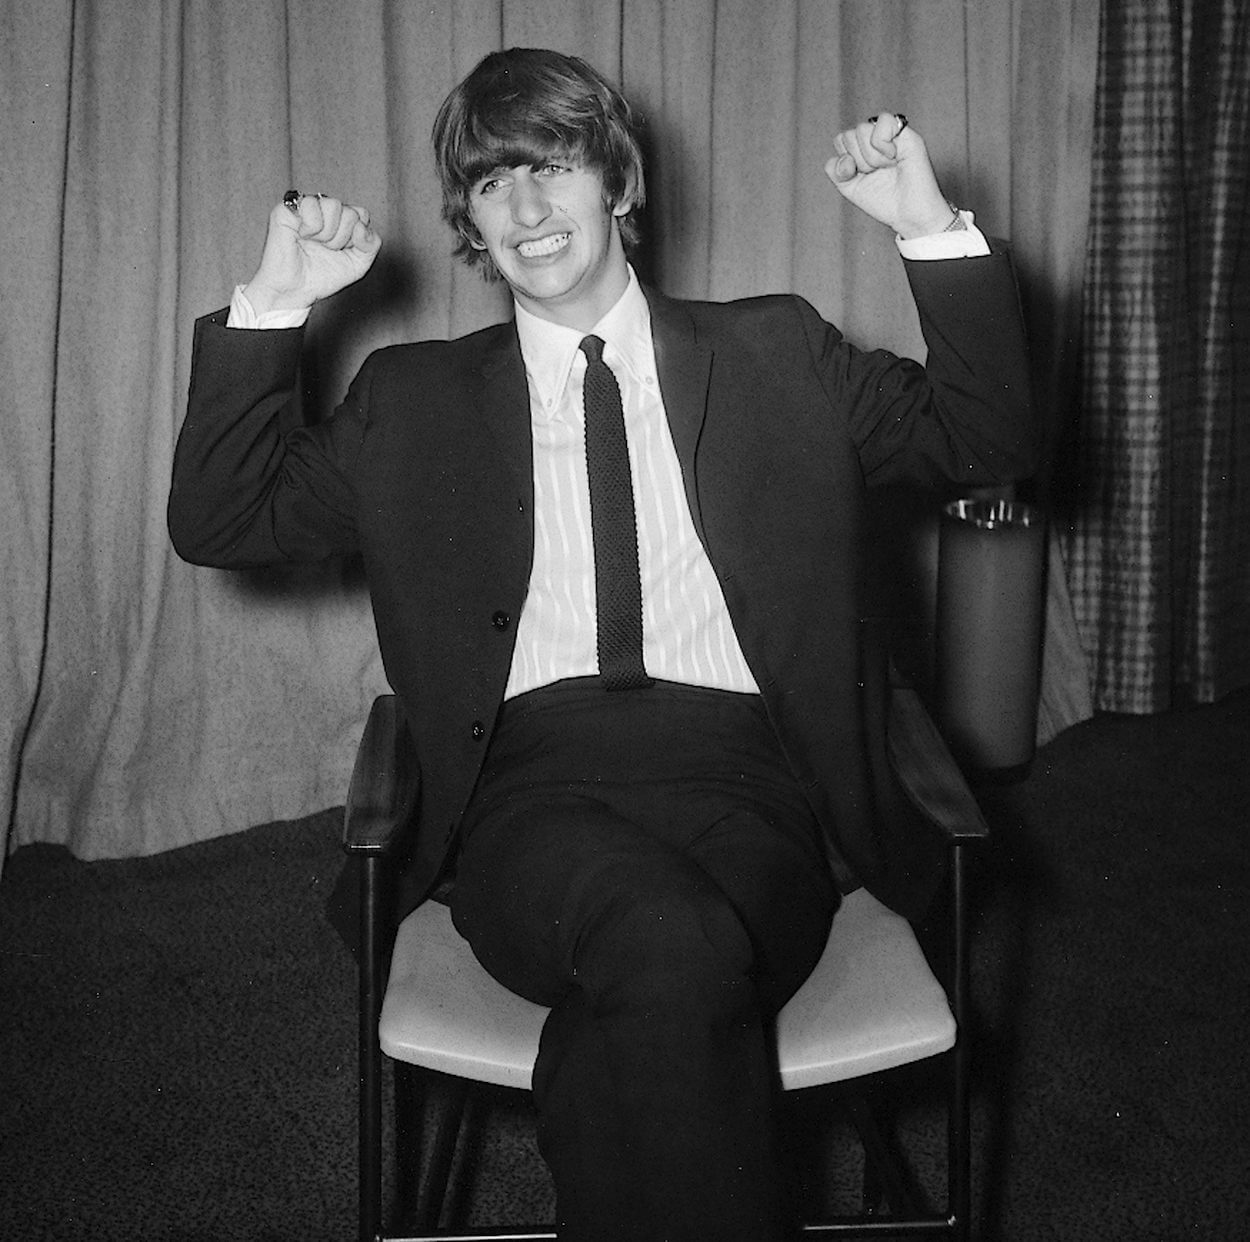 Ringo Starr wears a suit as he sits for a photo in February 1964.